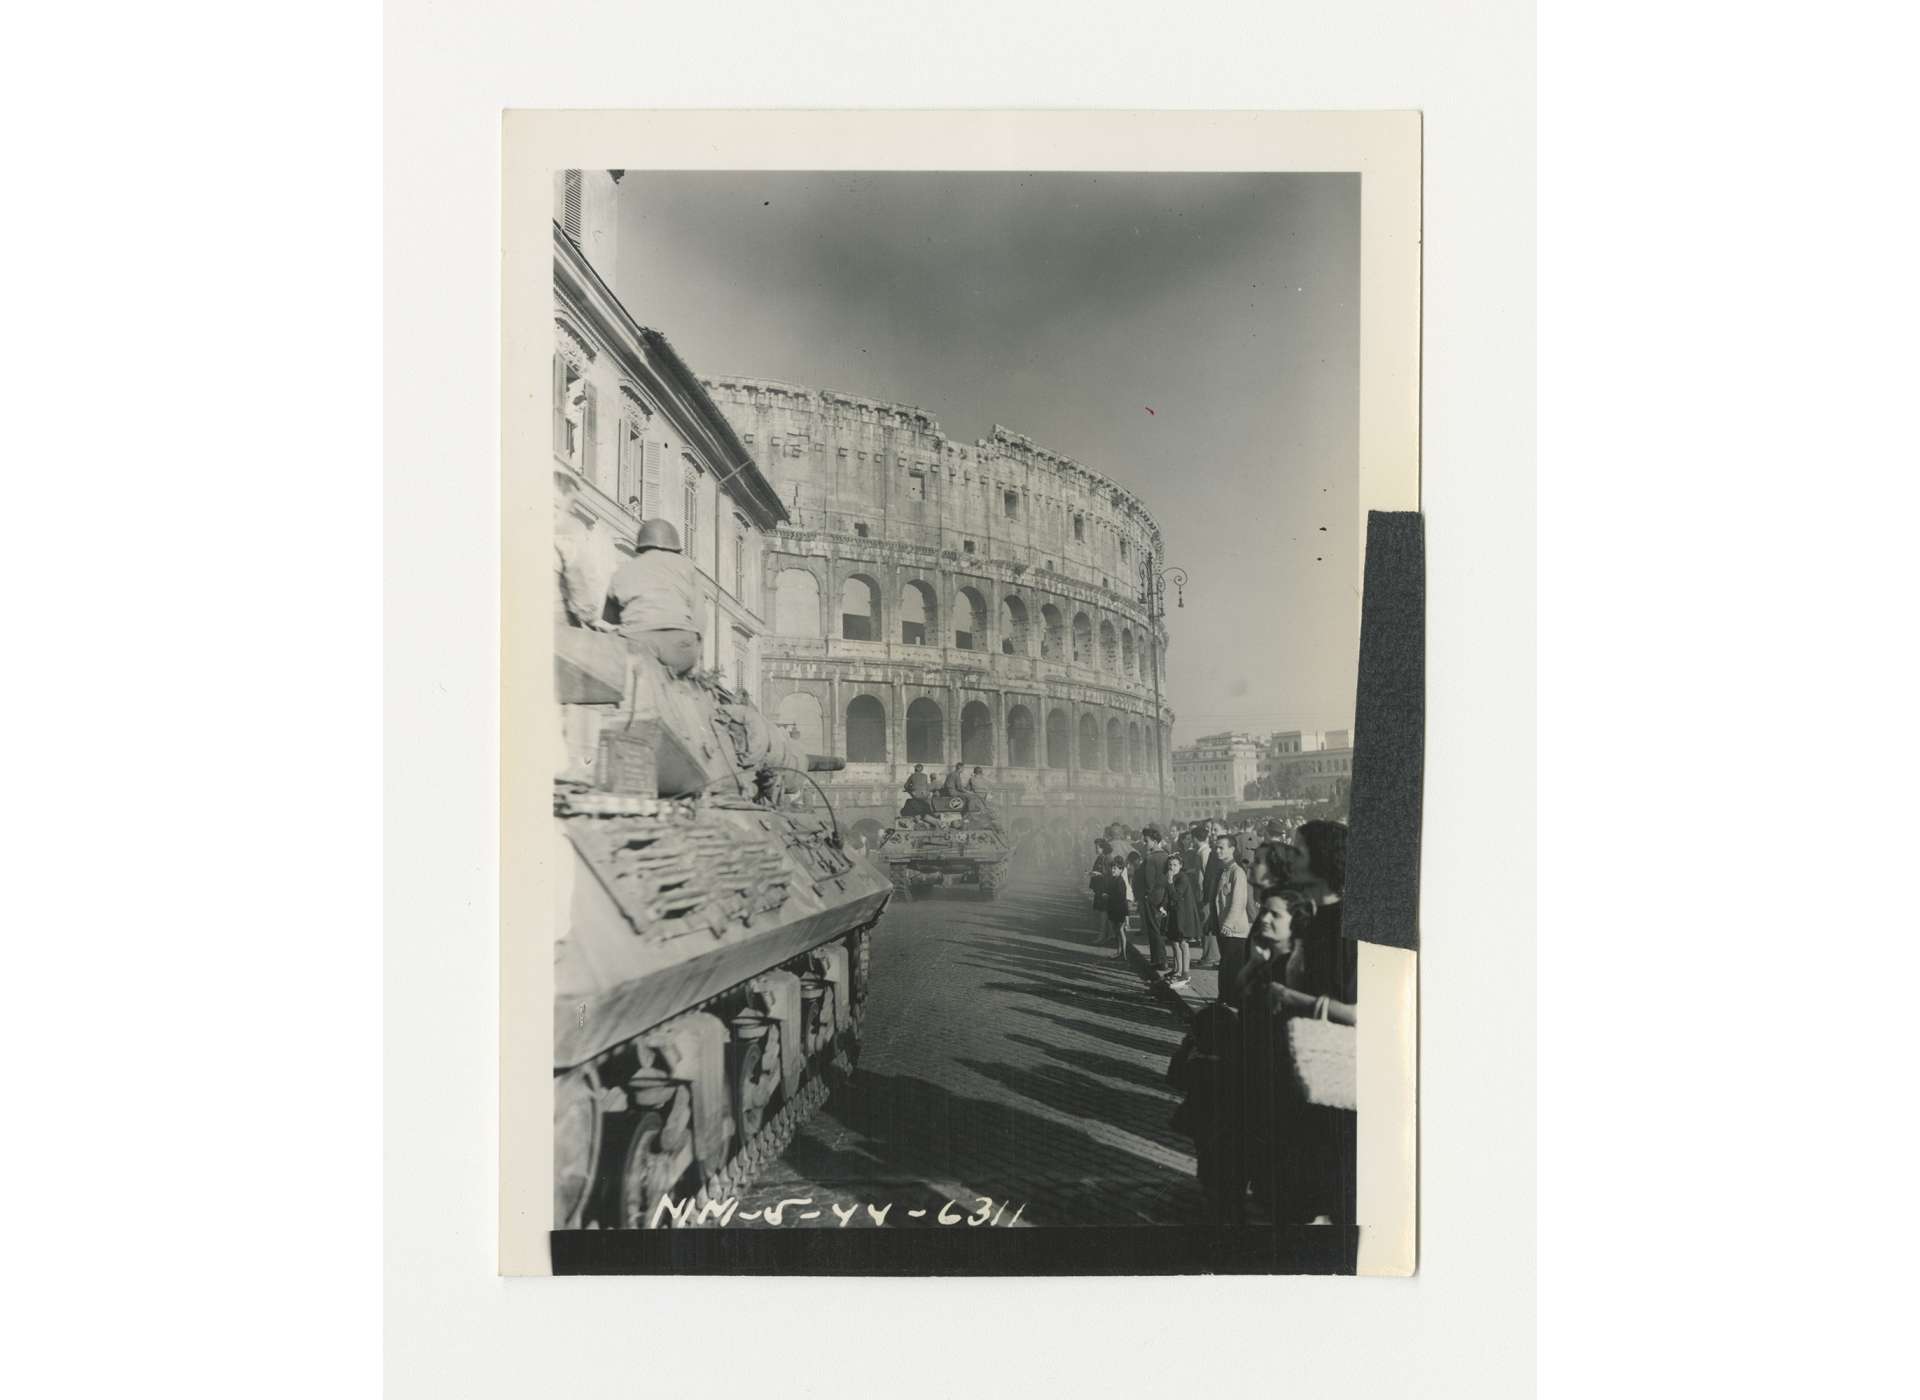 Men and tanks of the US 1st Armored Division, Fifth Army, stream by the Colosseum in Rome, June 5, 1944. US Army Signal Corps photo, gift of Ms. Regan Forrester, from the Collection of The National WWII Museum, 2002.337.624.